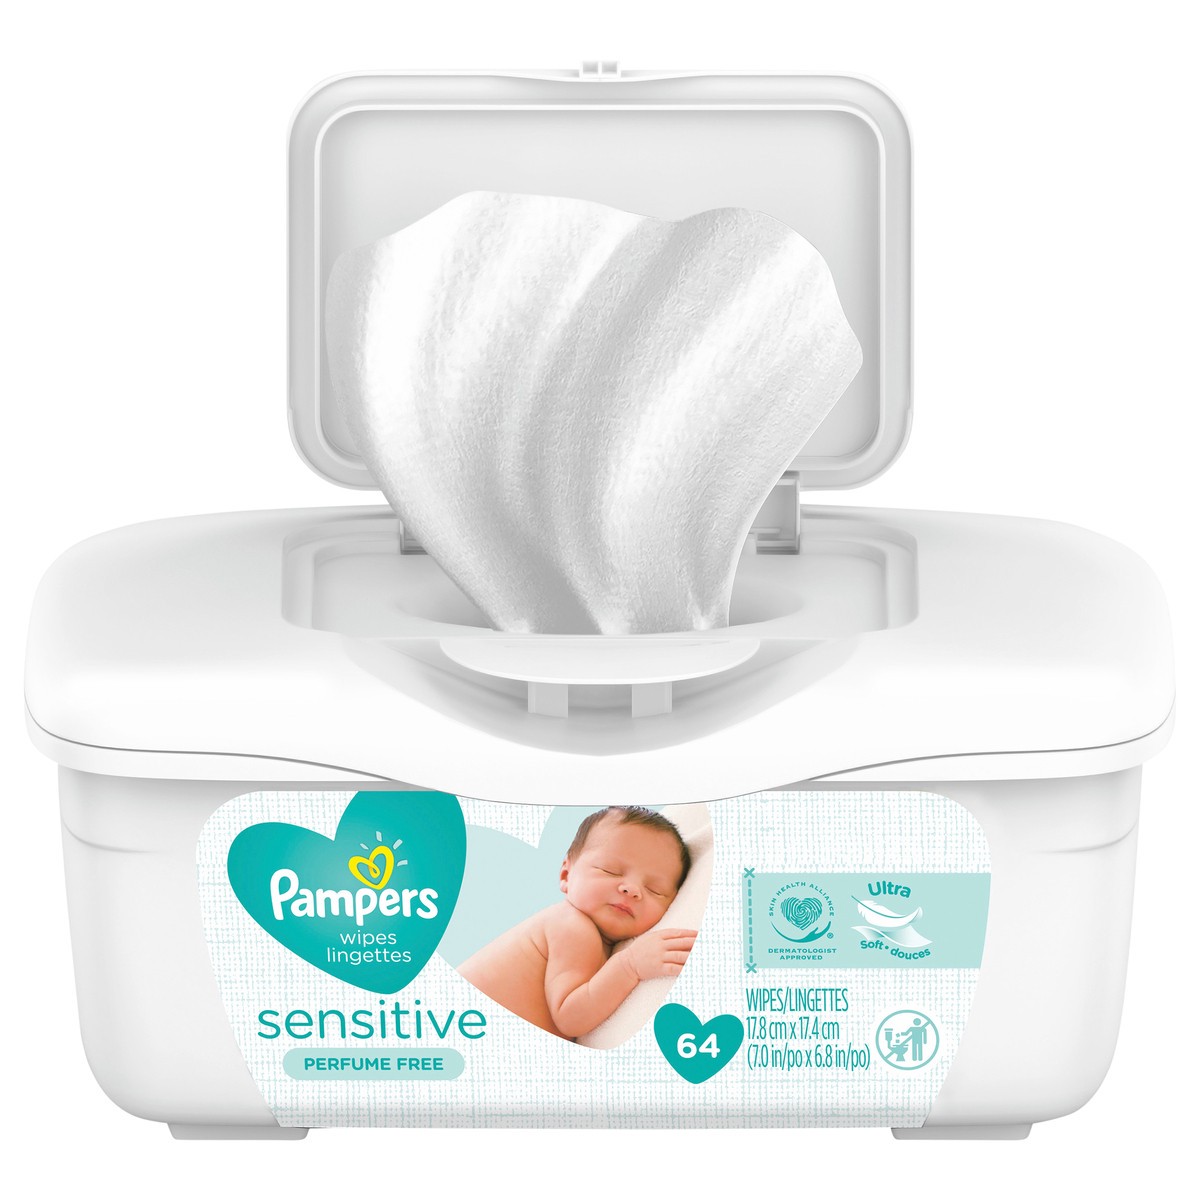 slide 1 of 4, Pampers Baby Wipes Sensitive Perfume Free Tub 64 Count, 64 ct